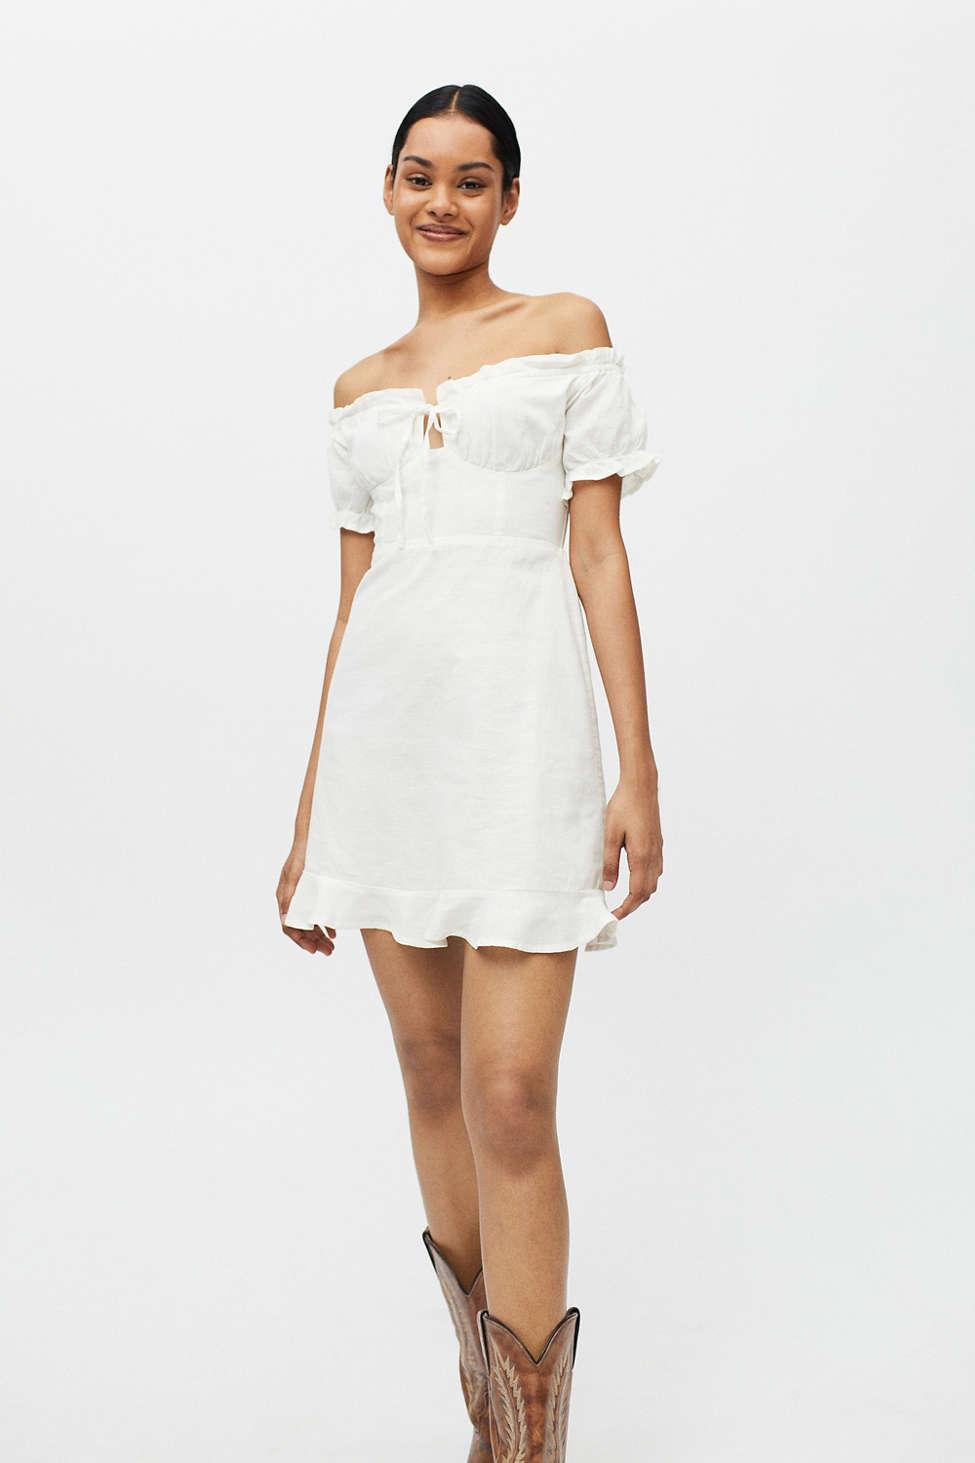 Videnskab Army Takke Urban Outfitters Uo Magpie Off-the-shoulder Mini Dress in White | Lyst